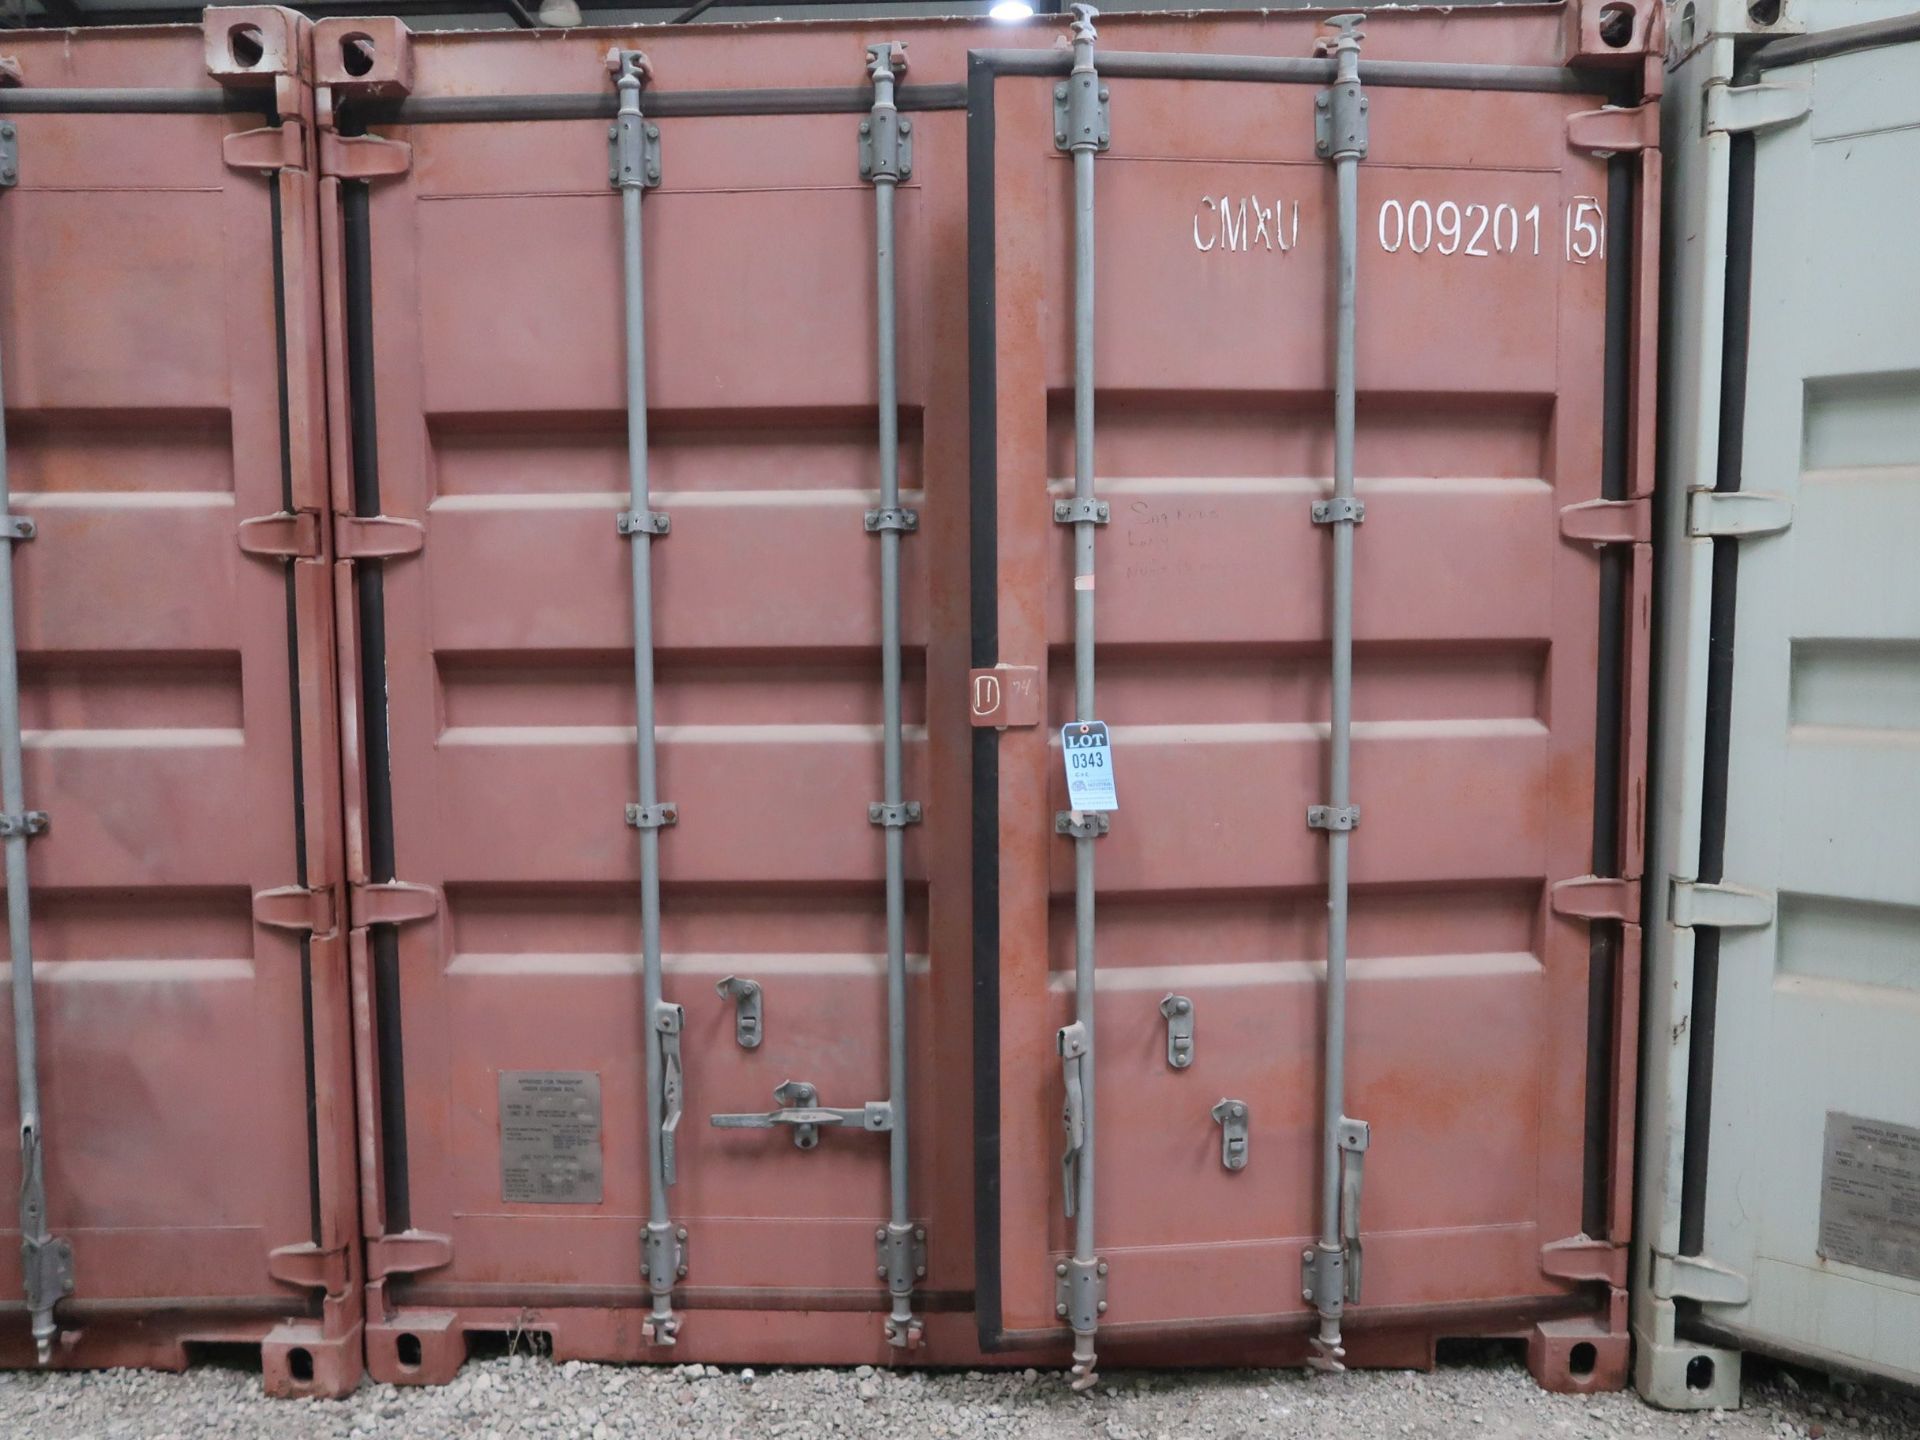 8' WIDE X 20' LONG CHARLESTON MARINE CONEX STORAGE CONTAINER WITH CONTENTS SAFETY EQUIPMENT